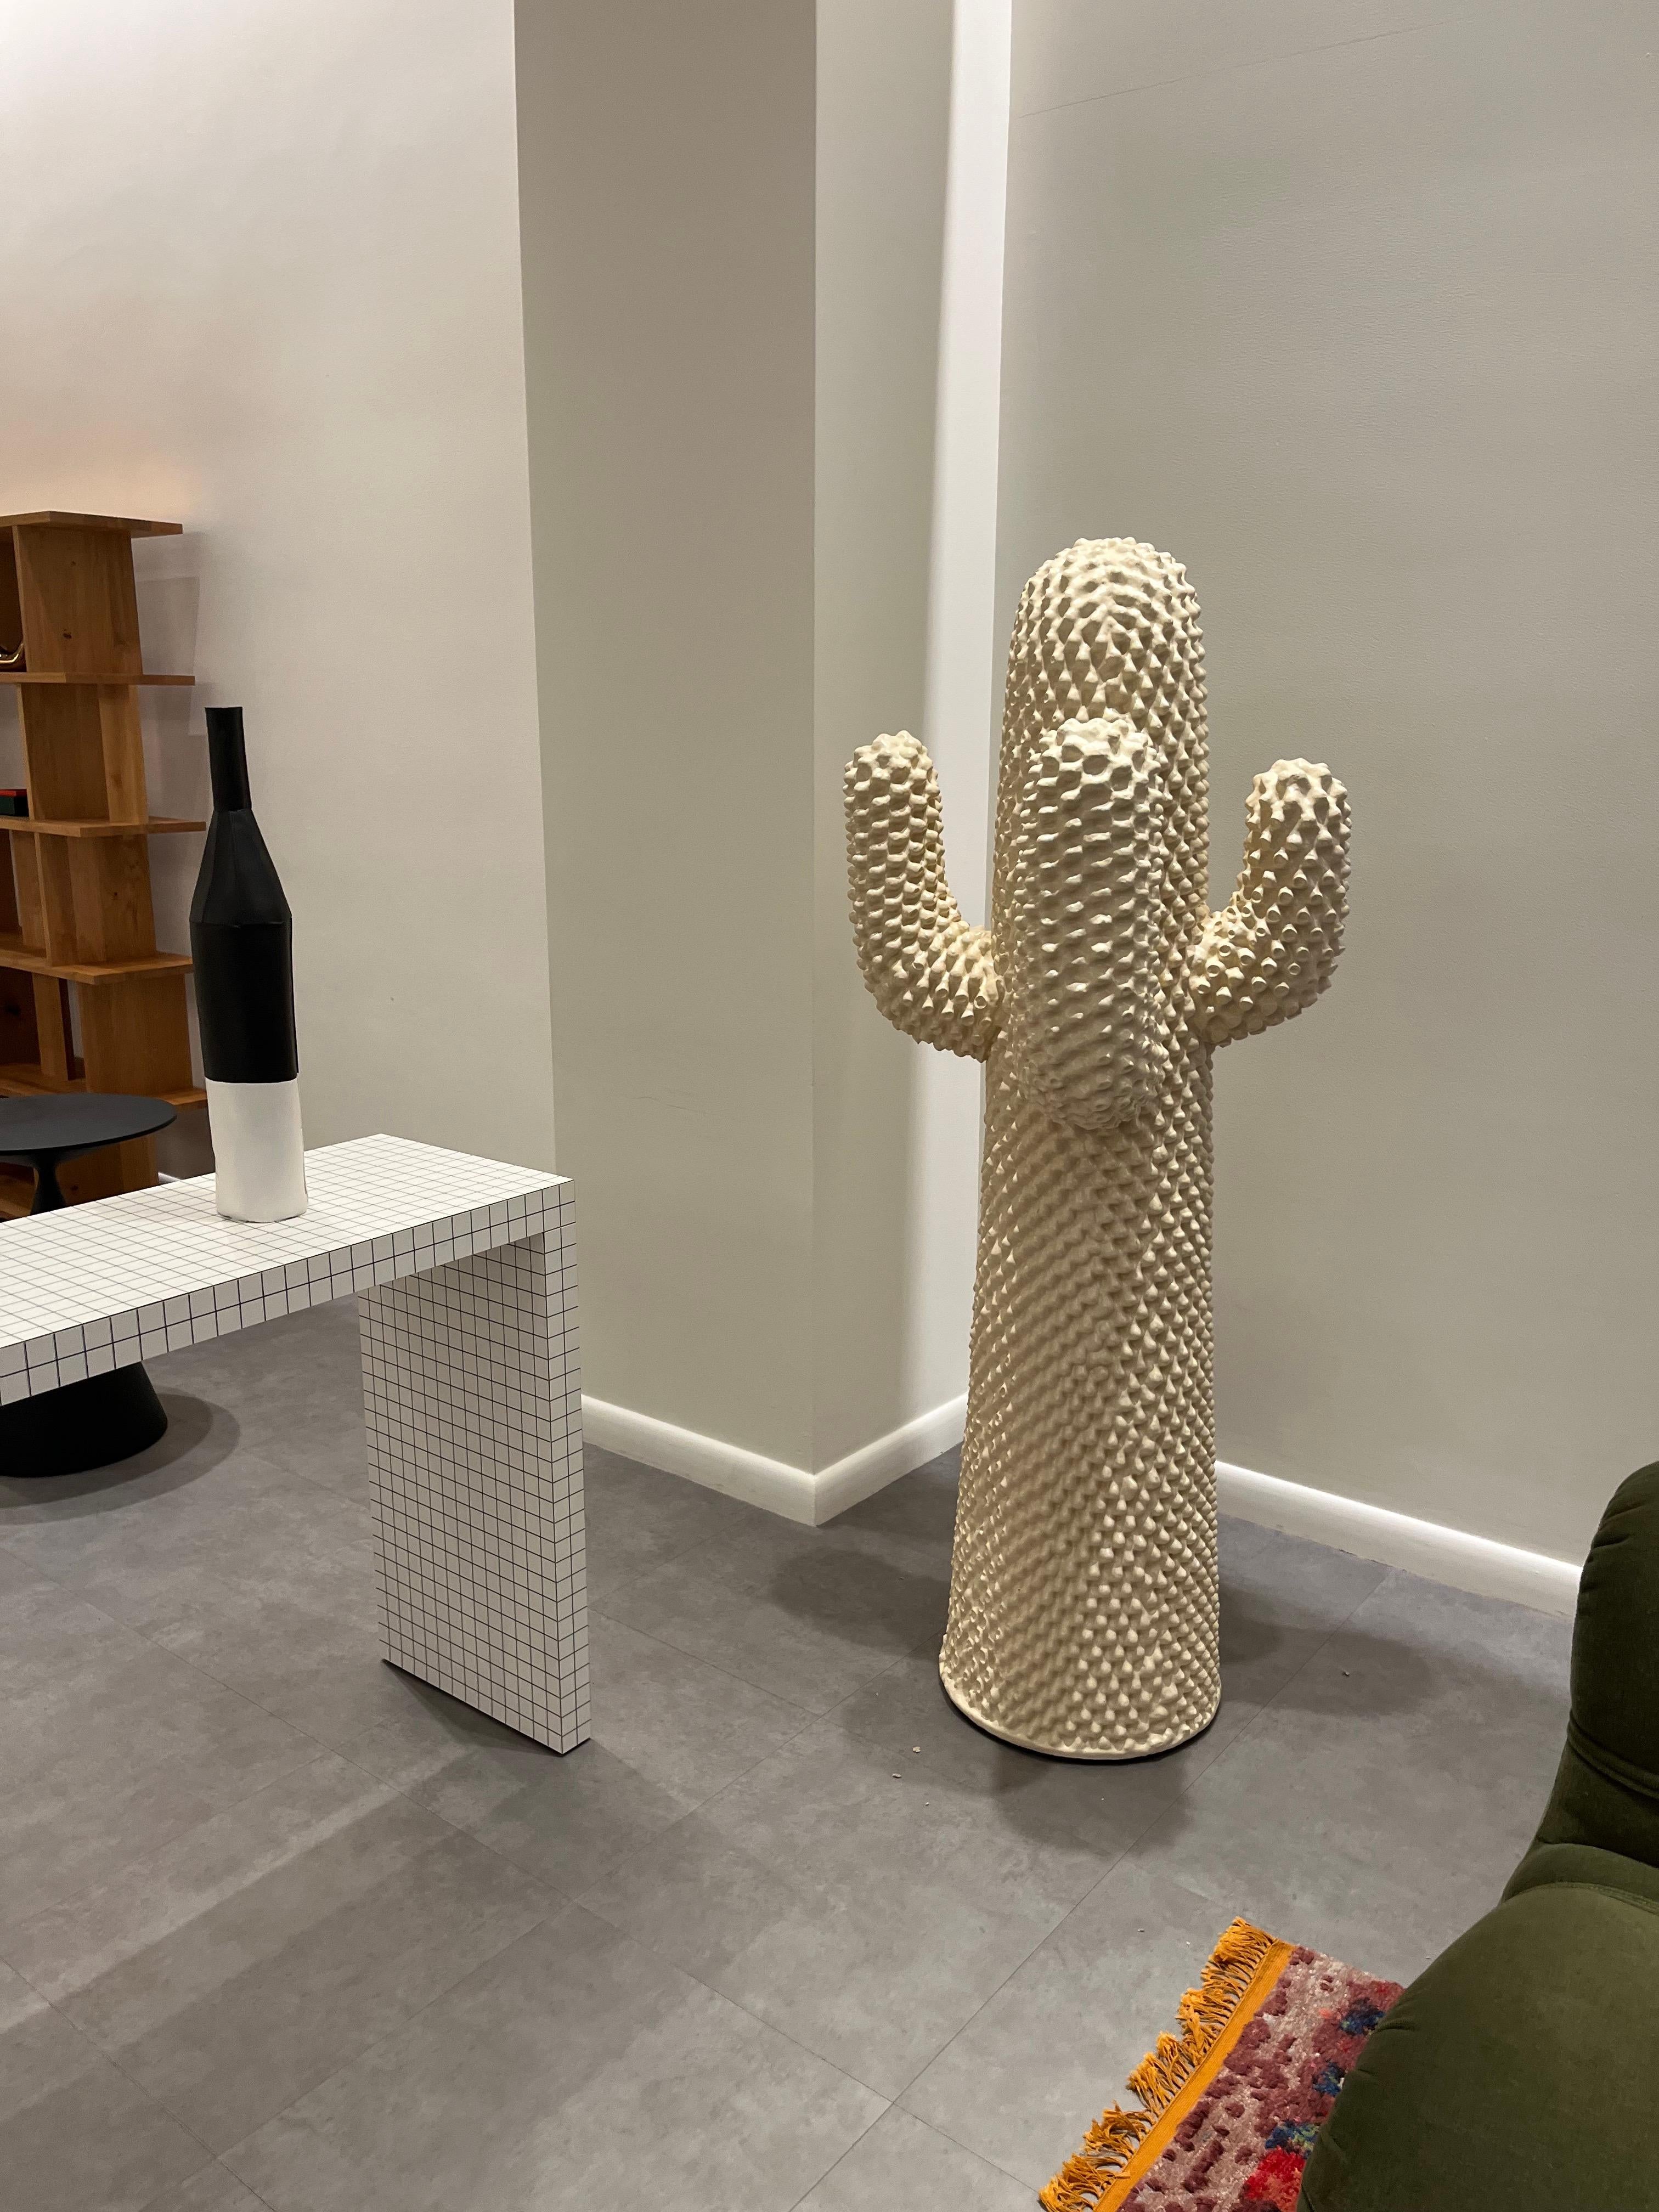 Gufram Another White Cactus Designed by Drocco / Mello in Stock In Excellent Condition For Sale In New York, NY